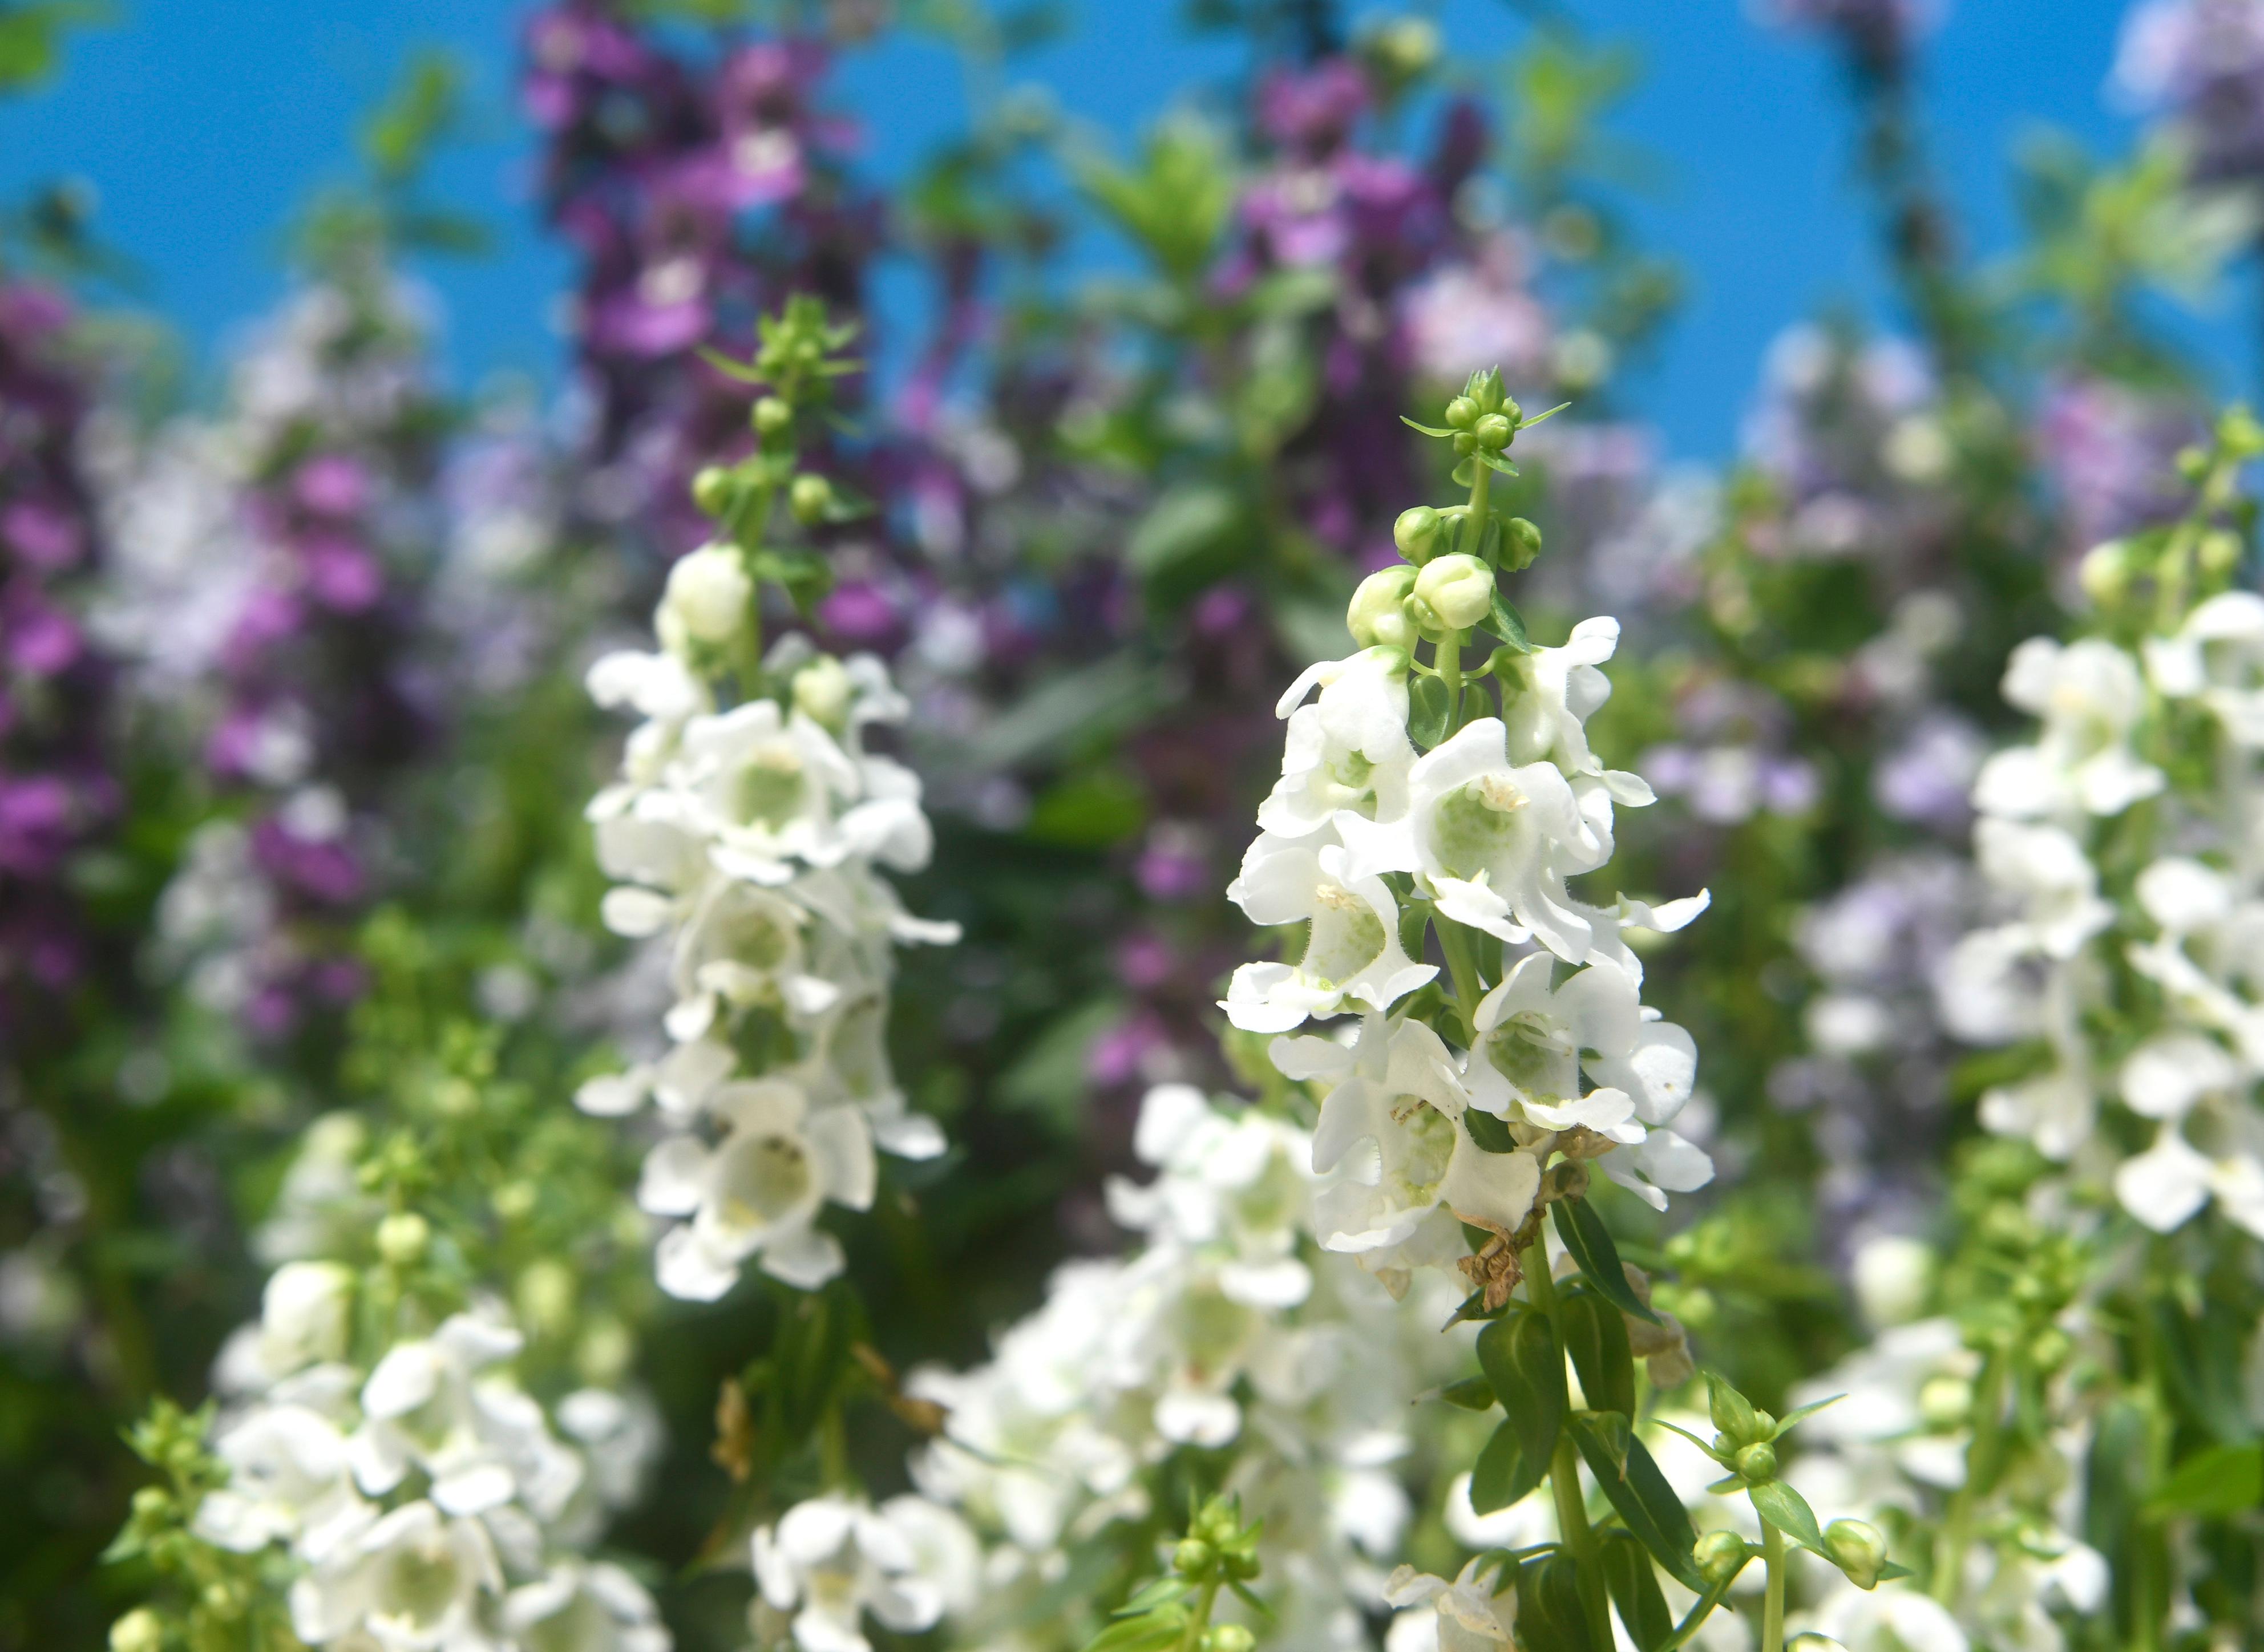 The Hong Kong Flower Show will be held at Victoria Park for 10 days from March 15 to 24, featuring the colourful angelonia as the theme flower and "Floral Joy Around Town" as the main theme. Heavily covered with little flower buds, its stem produces lush and bushy flowers when in full bloom.

